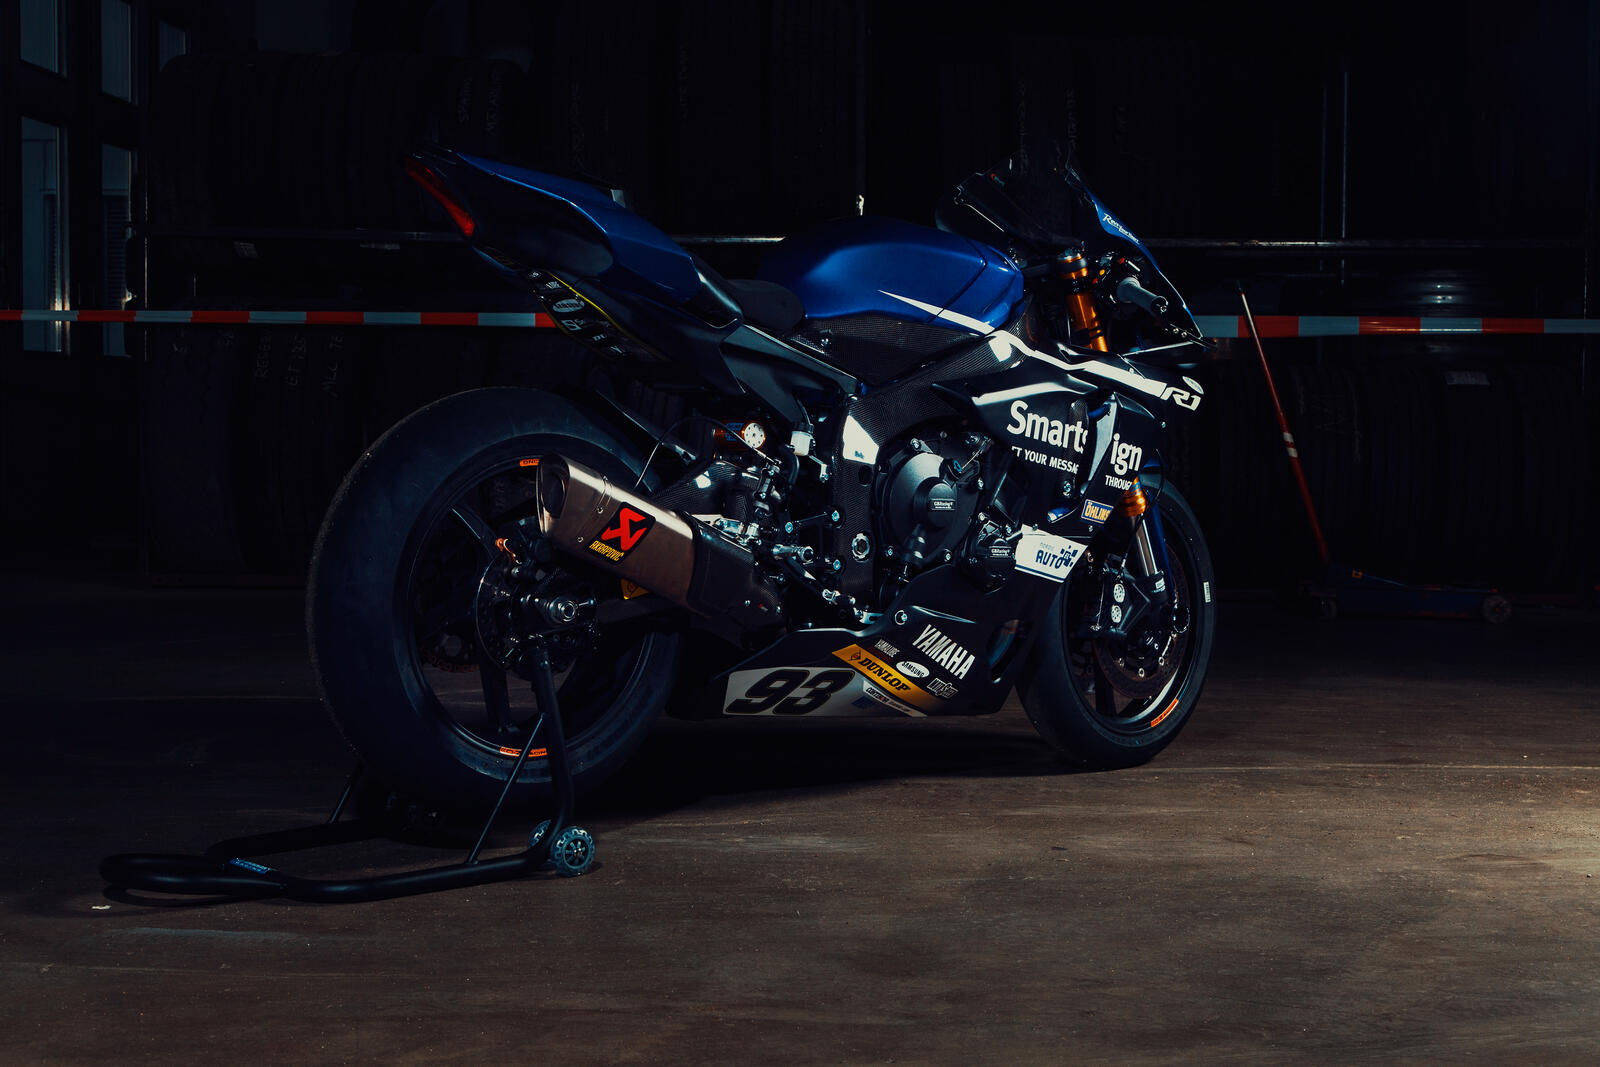 Wallpapers Behance Yamaha R1 motorcycles on the desktop